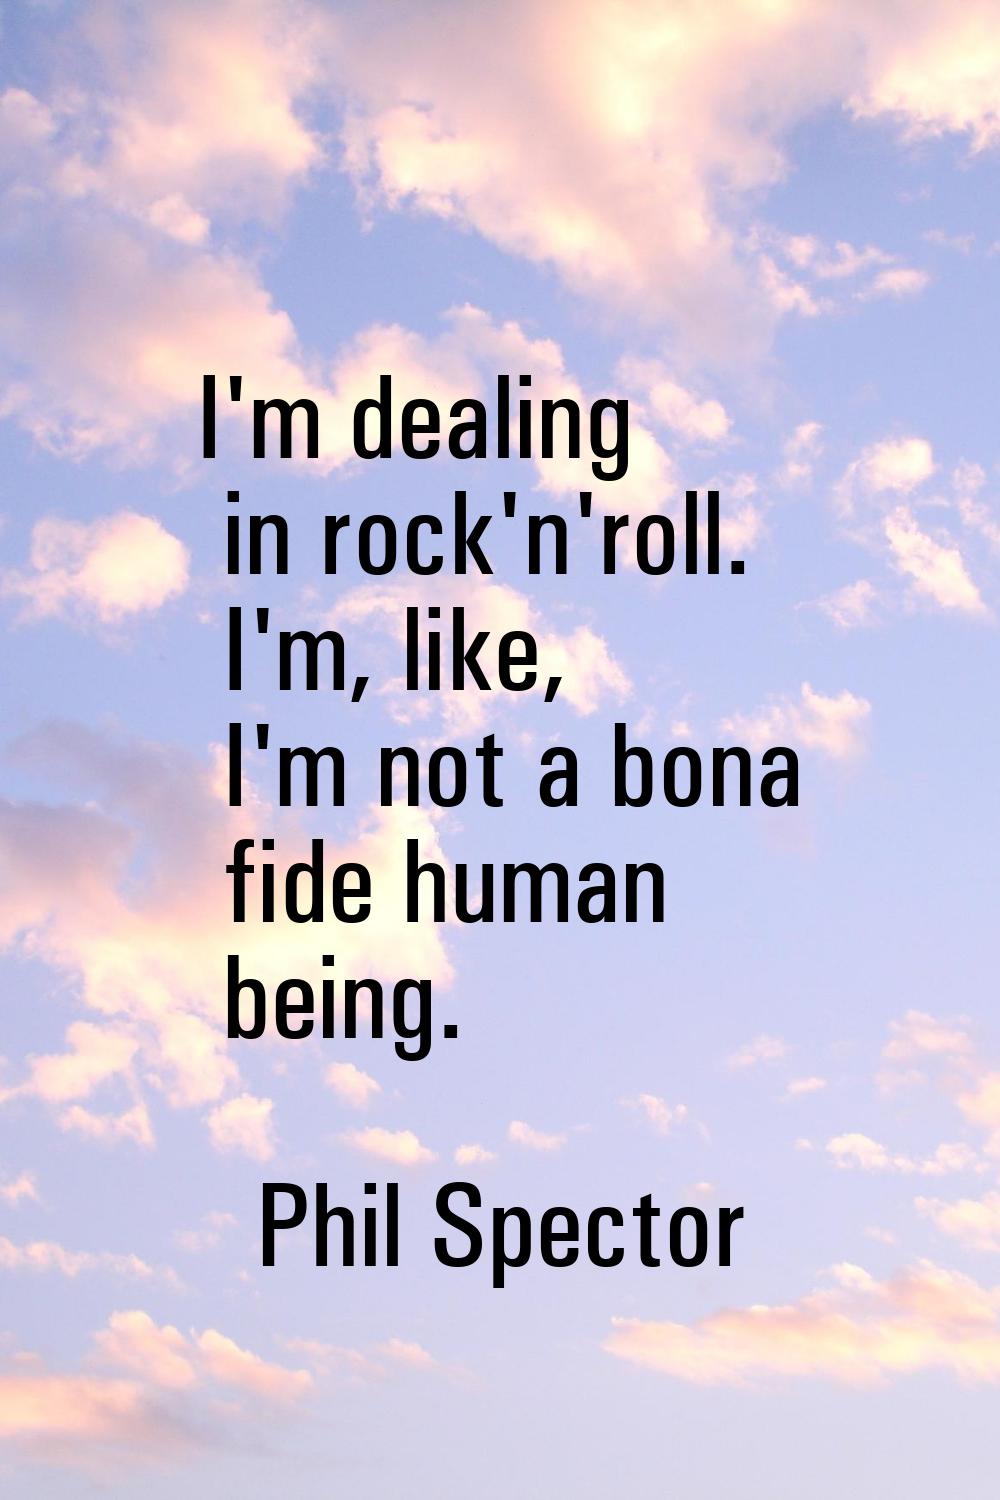 I'm dealing in rock'n'roll. I'm, like, I'm not a bona fide human being.